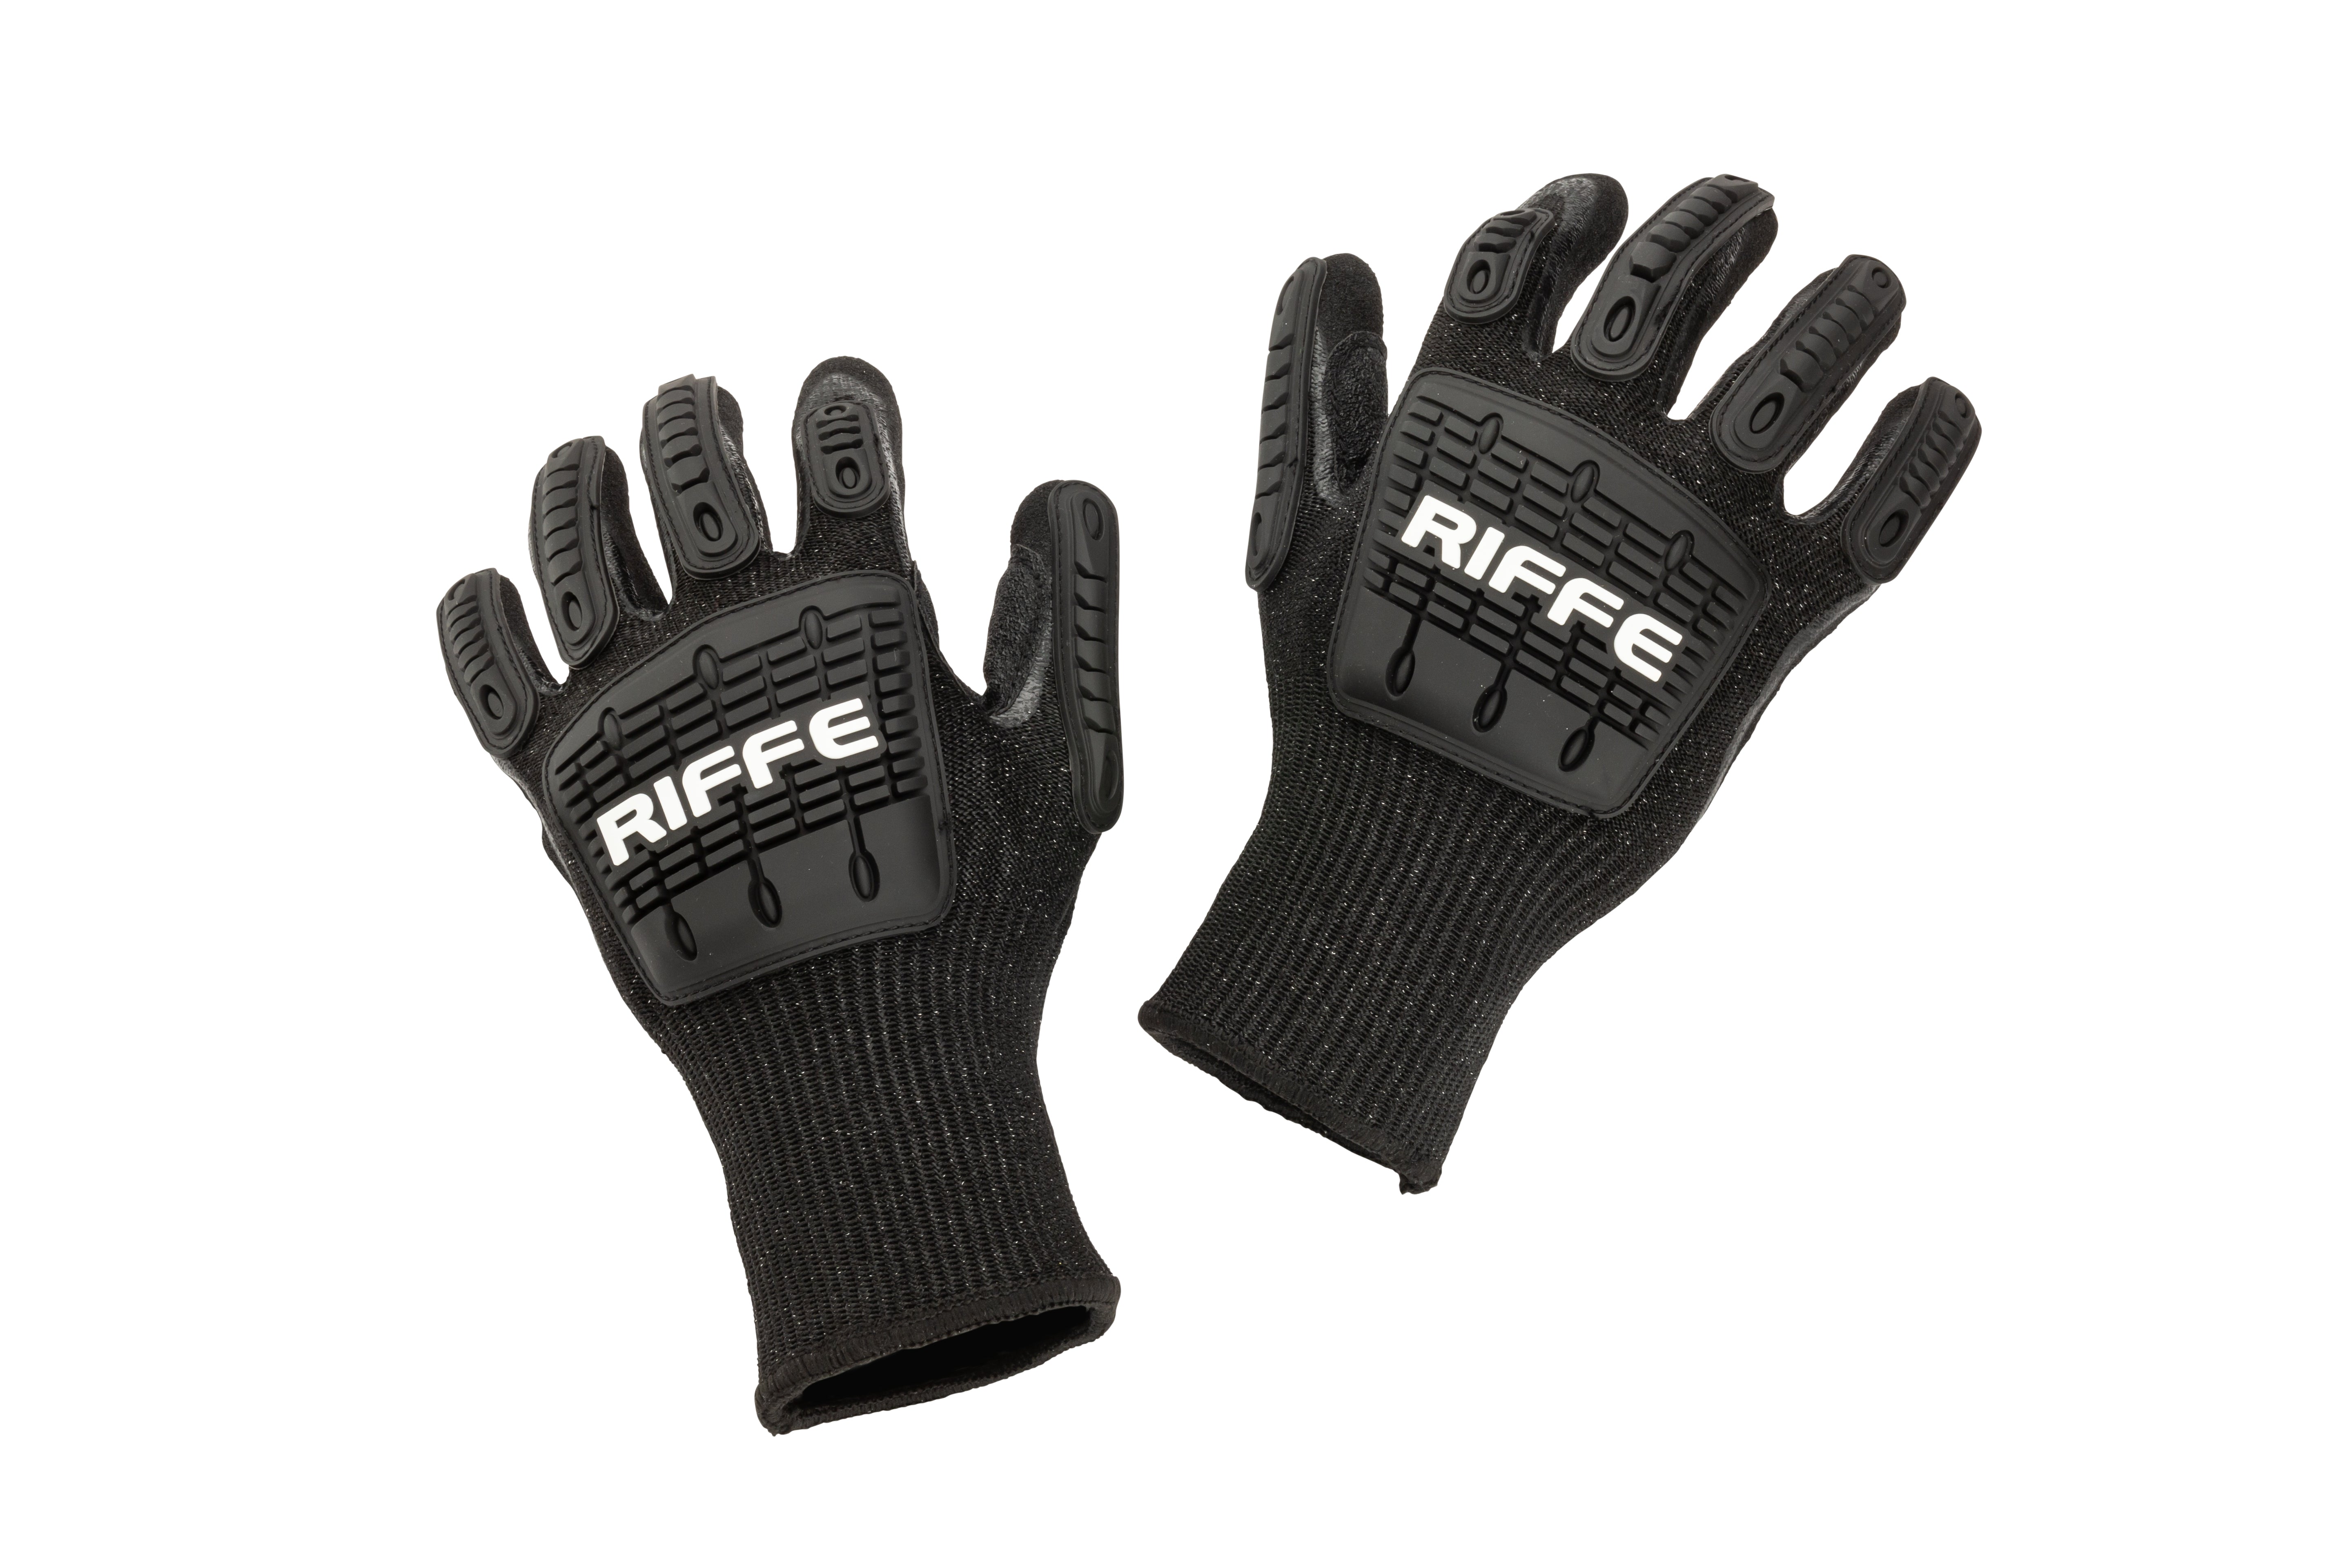 Riffe Holdfast/Cut-Resistant Impact Gloves